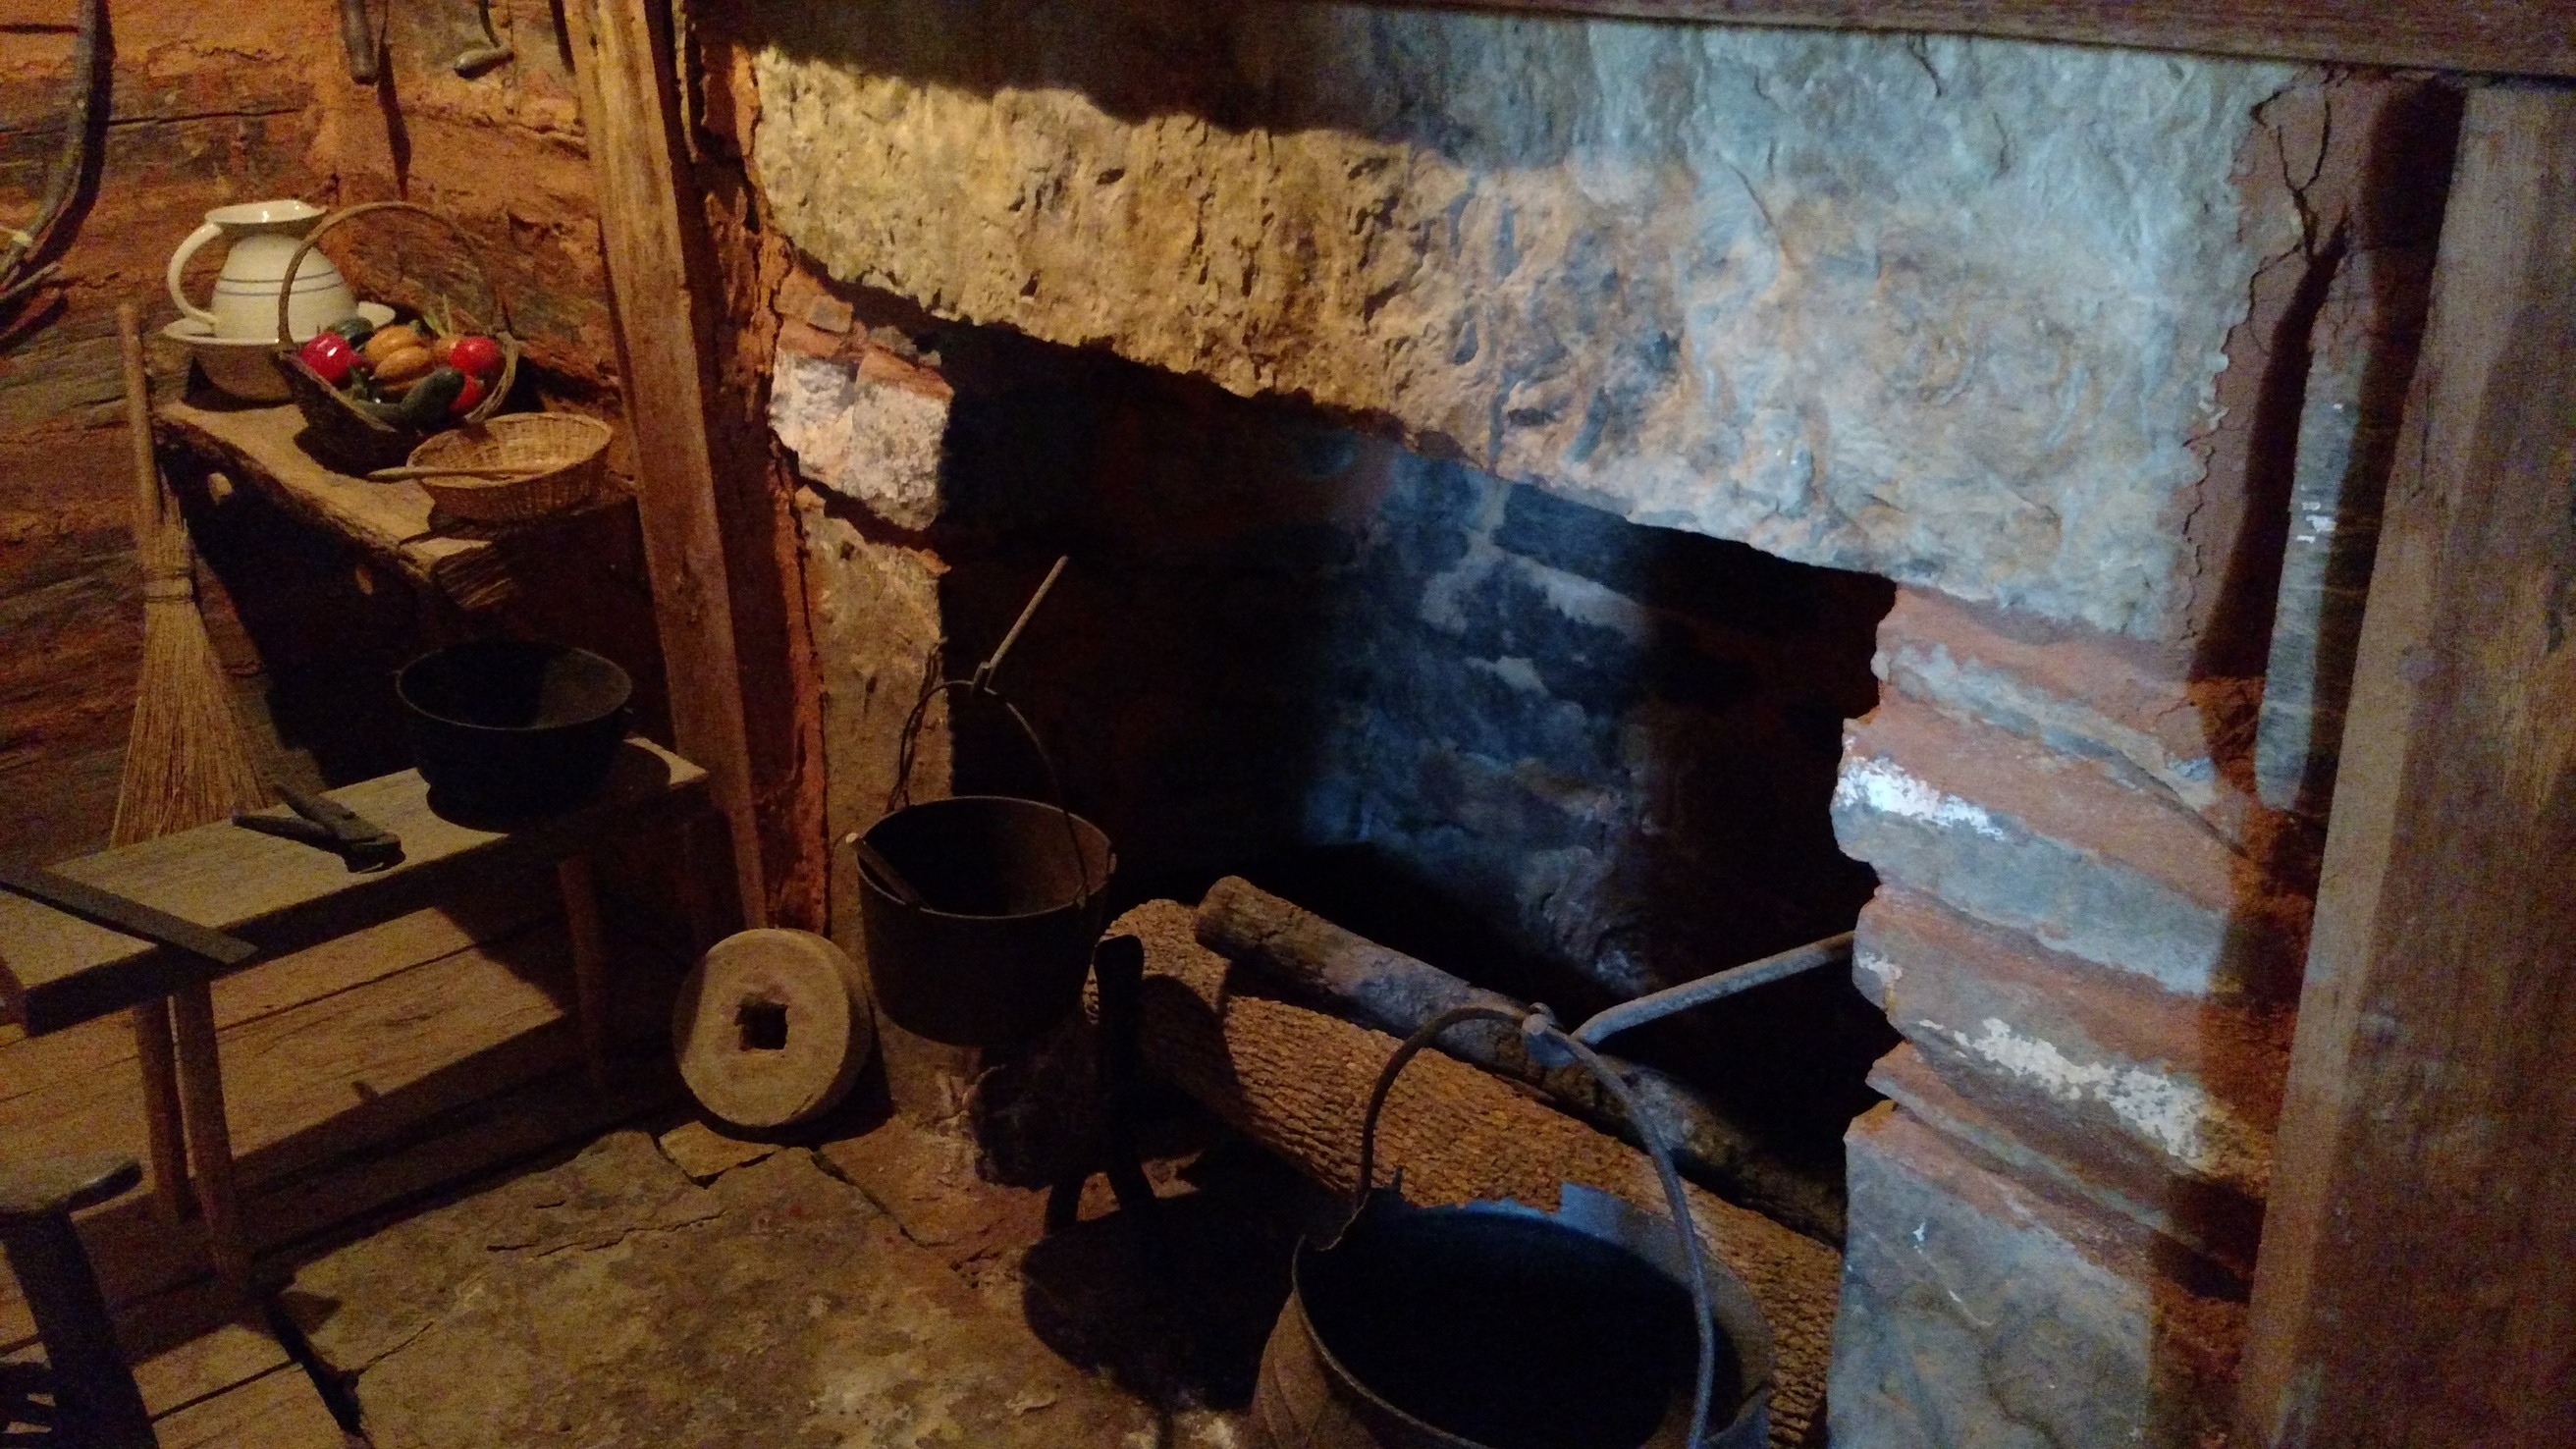 A fireplace and cooking exhibit at Sequoyah's Cabin in Sallisaw, Oklahoma